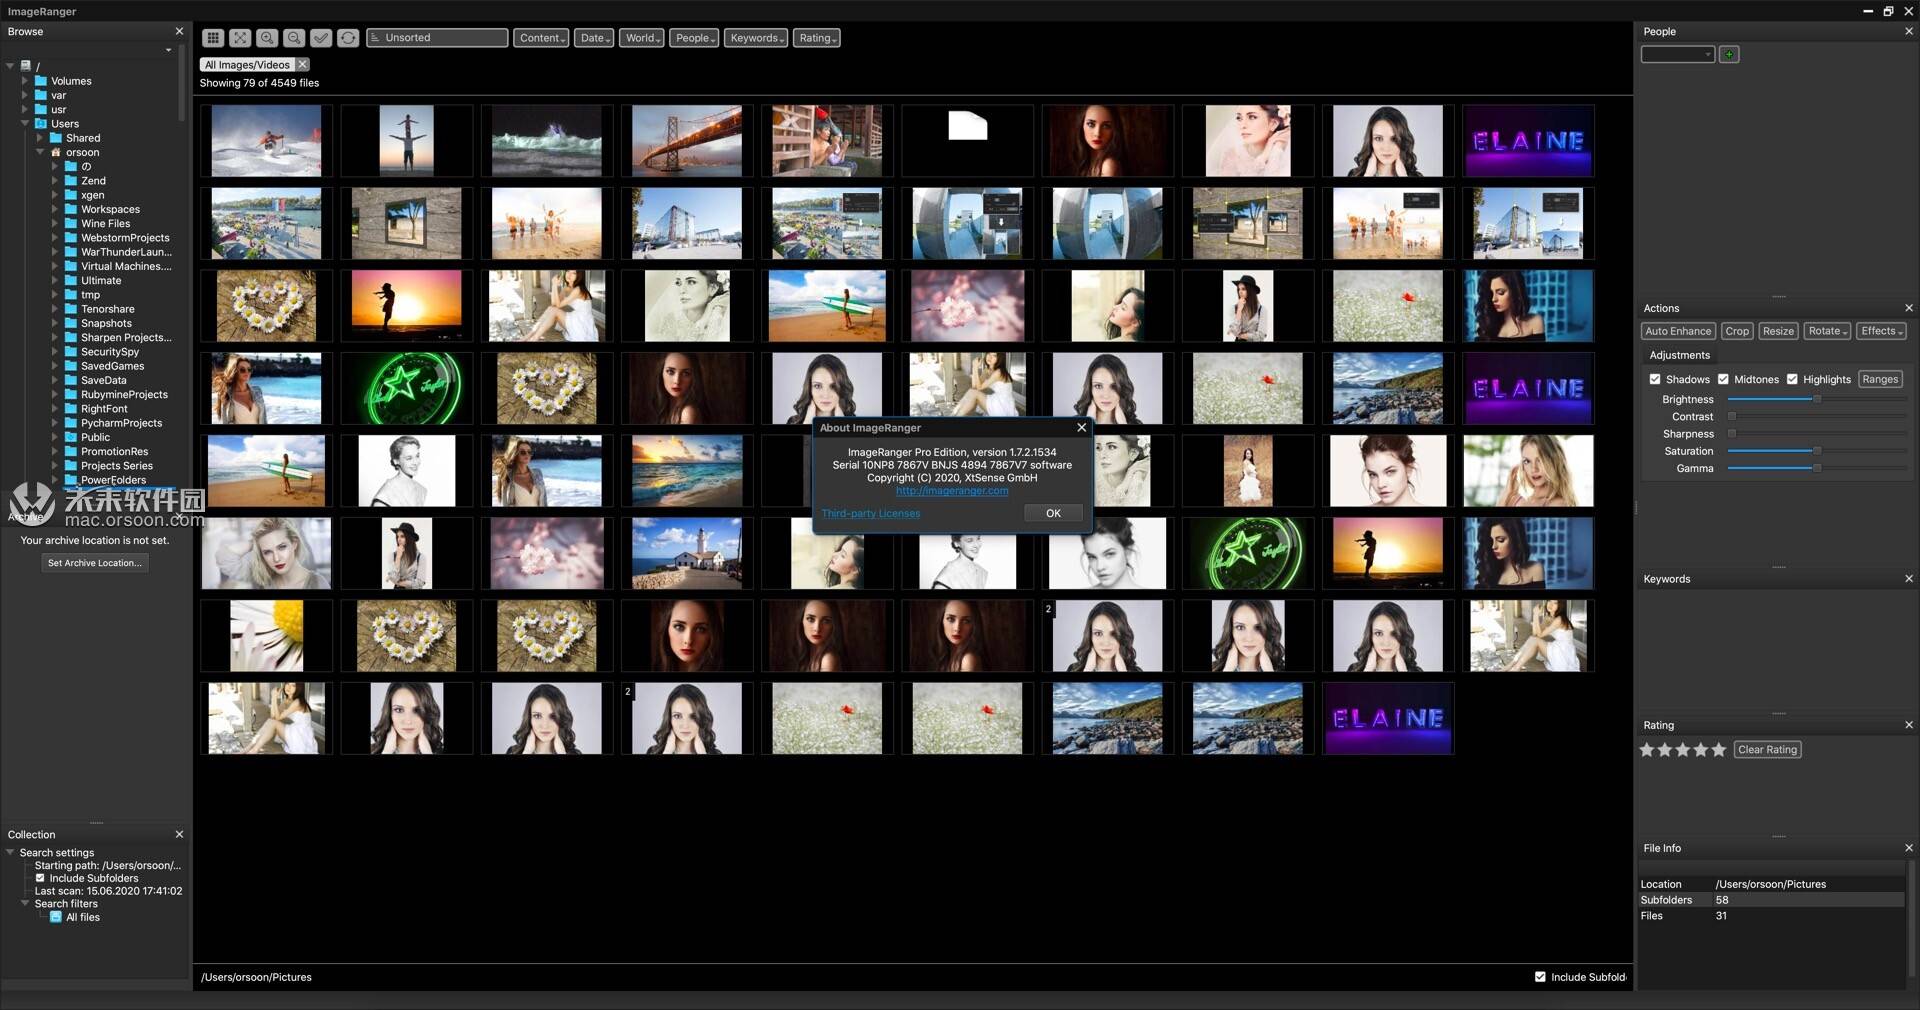 ImageRanger Pro Edition 1.9.4.1865 for ios instal free